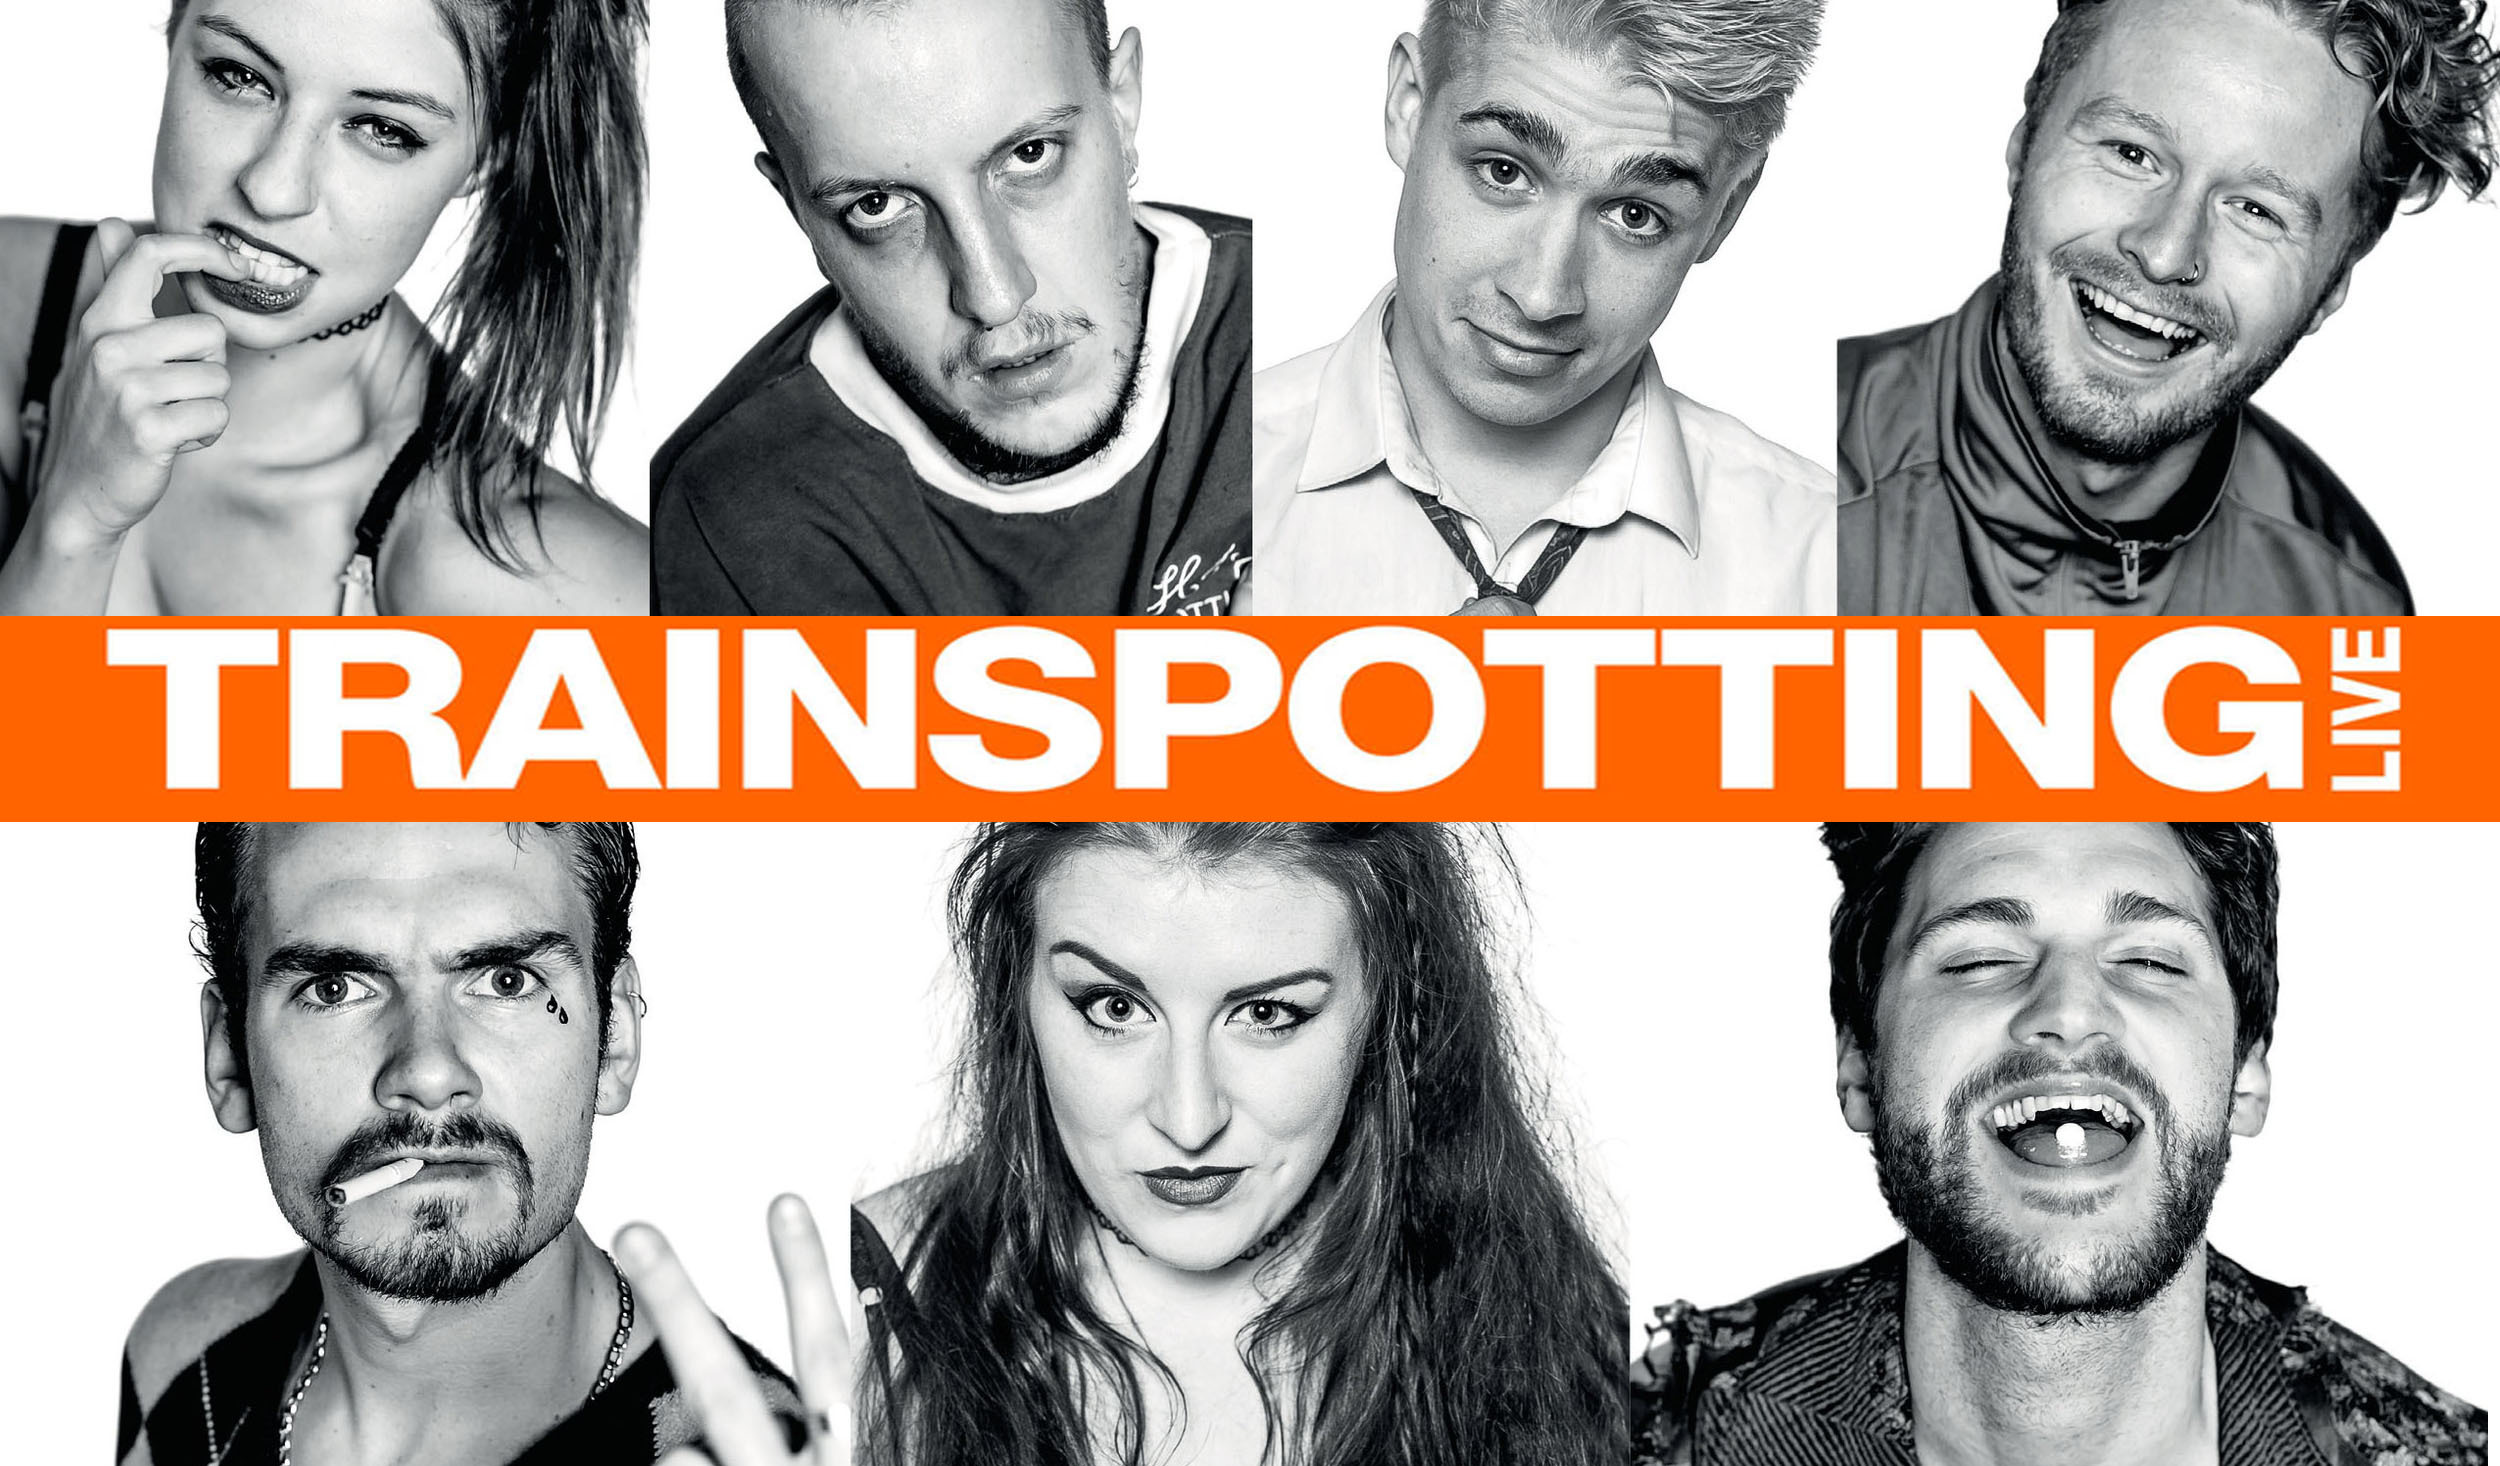 The cast of the NYC Trainspotting show won’t tone down the accents